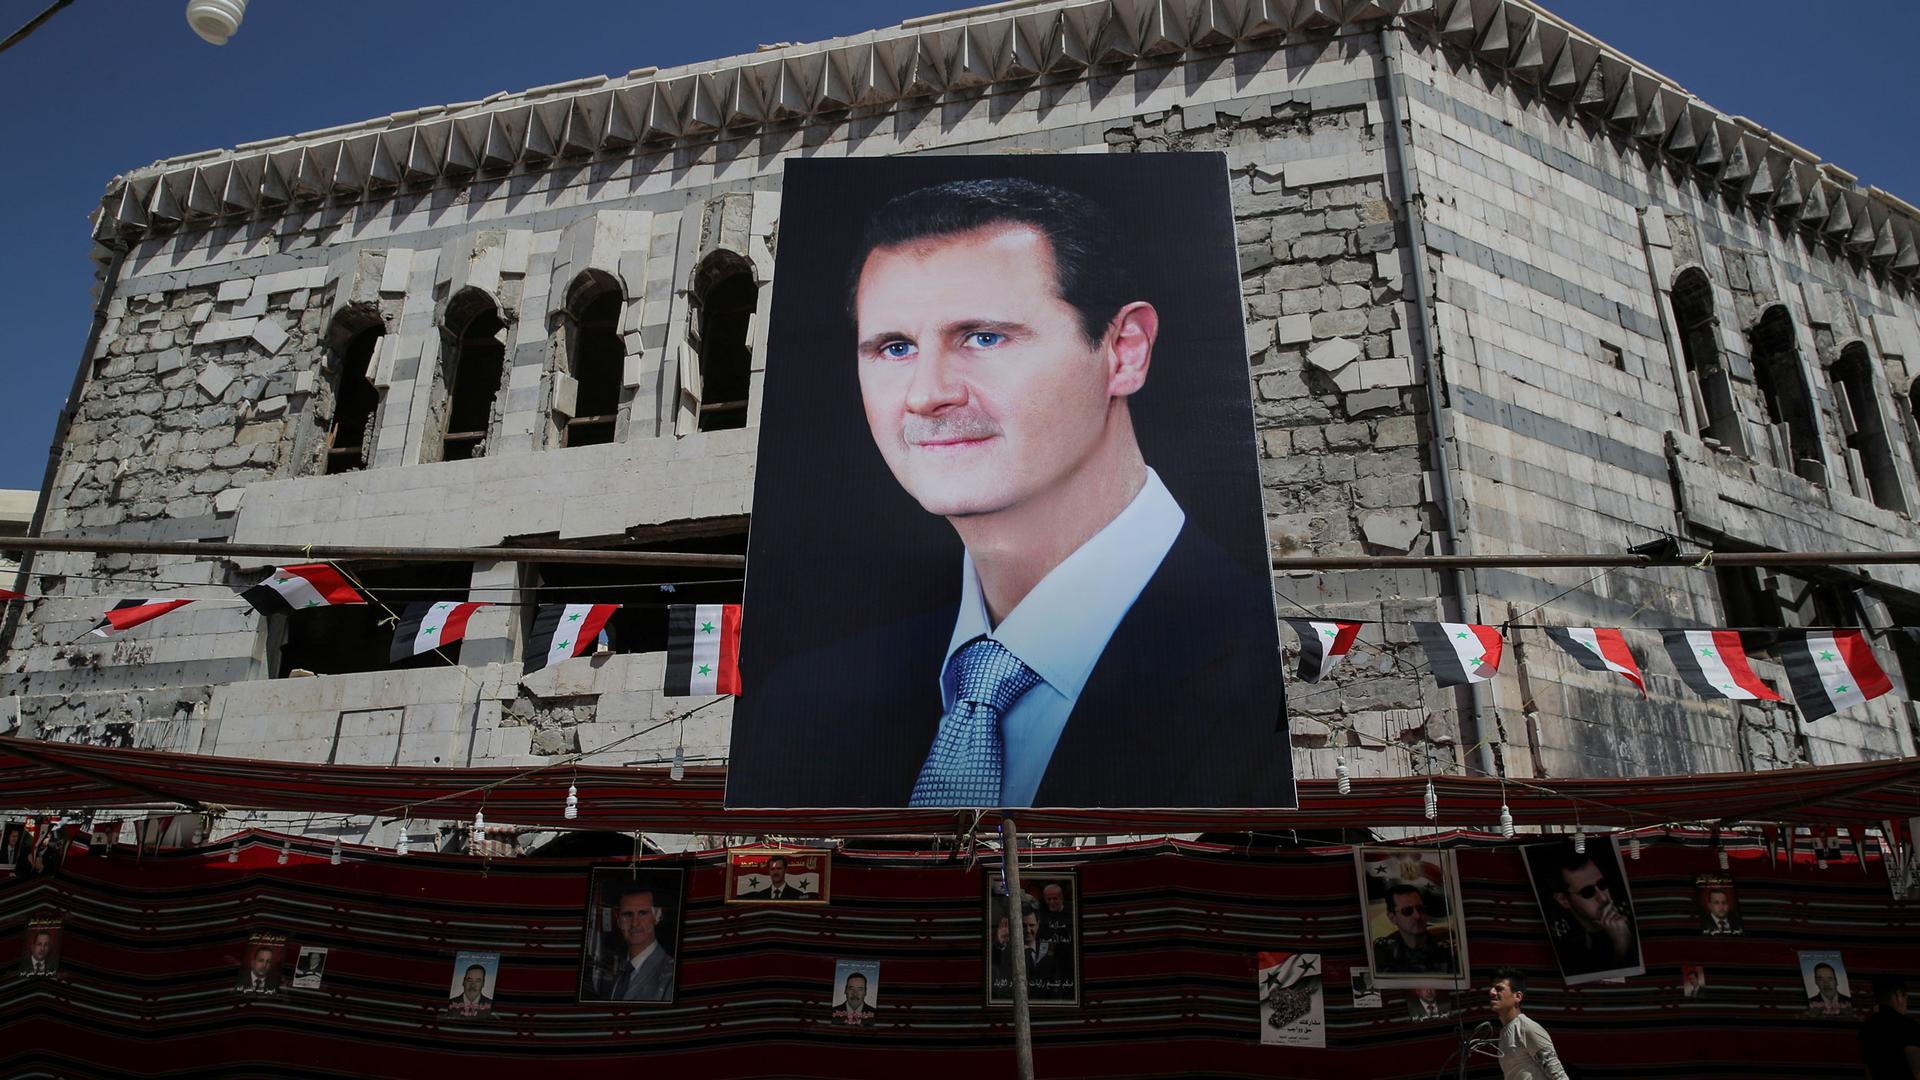 A large portrait photograph is show of Syrian president Bashar al-Assad with several Syrian flags flying behind it.